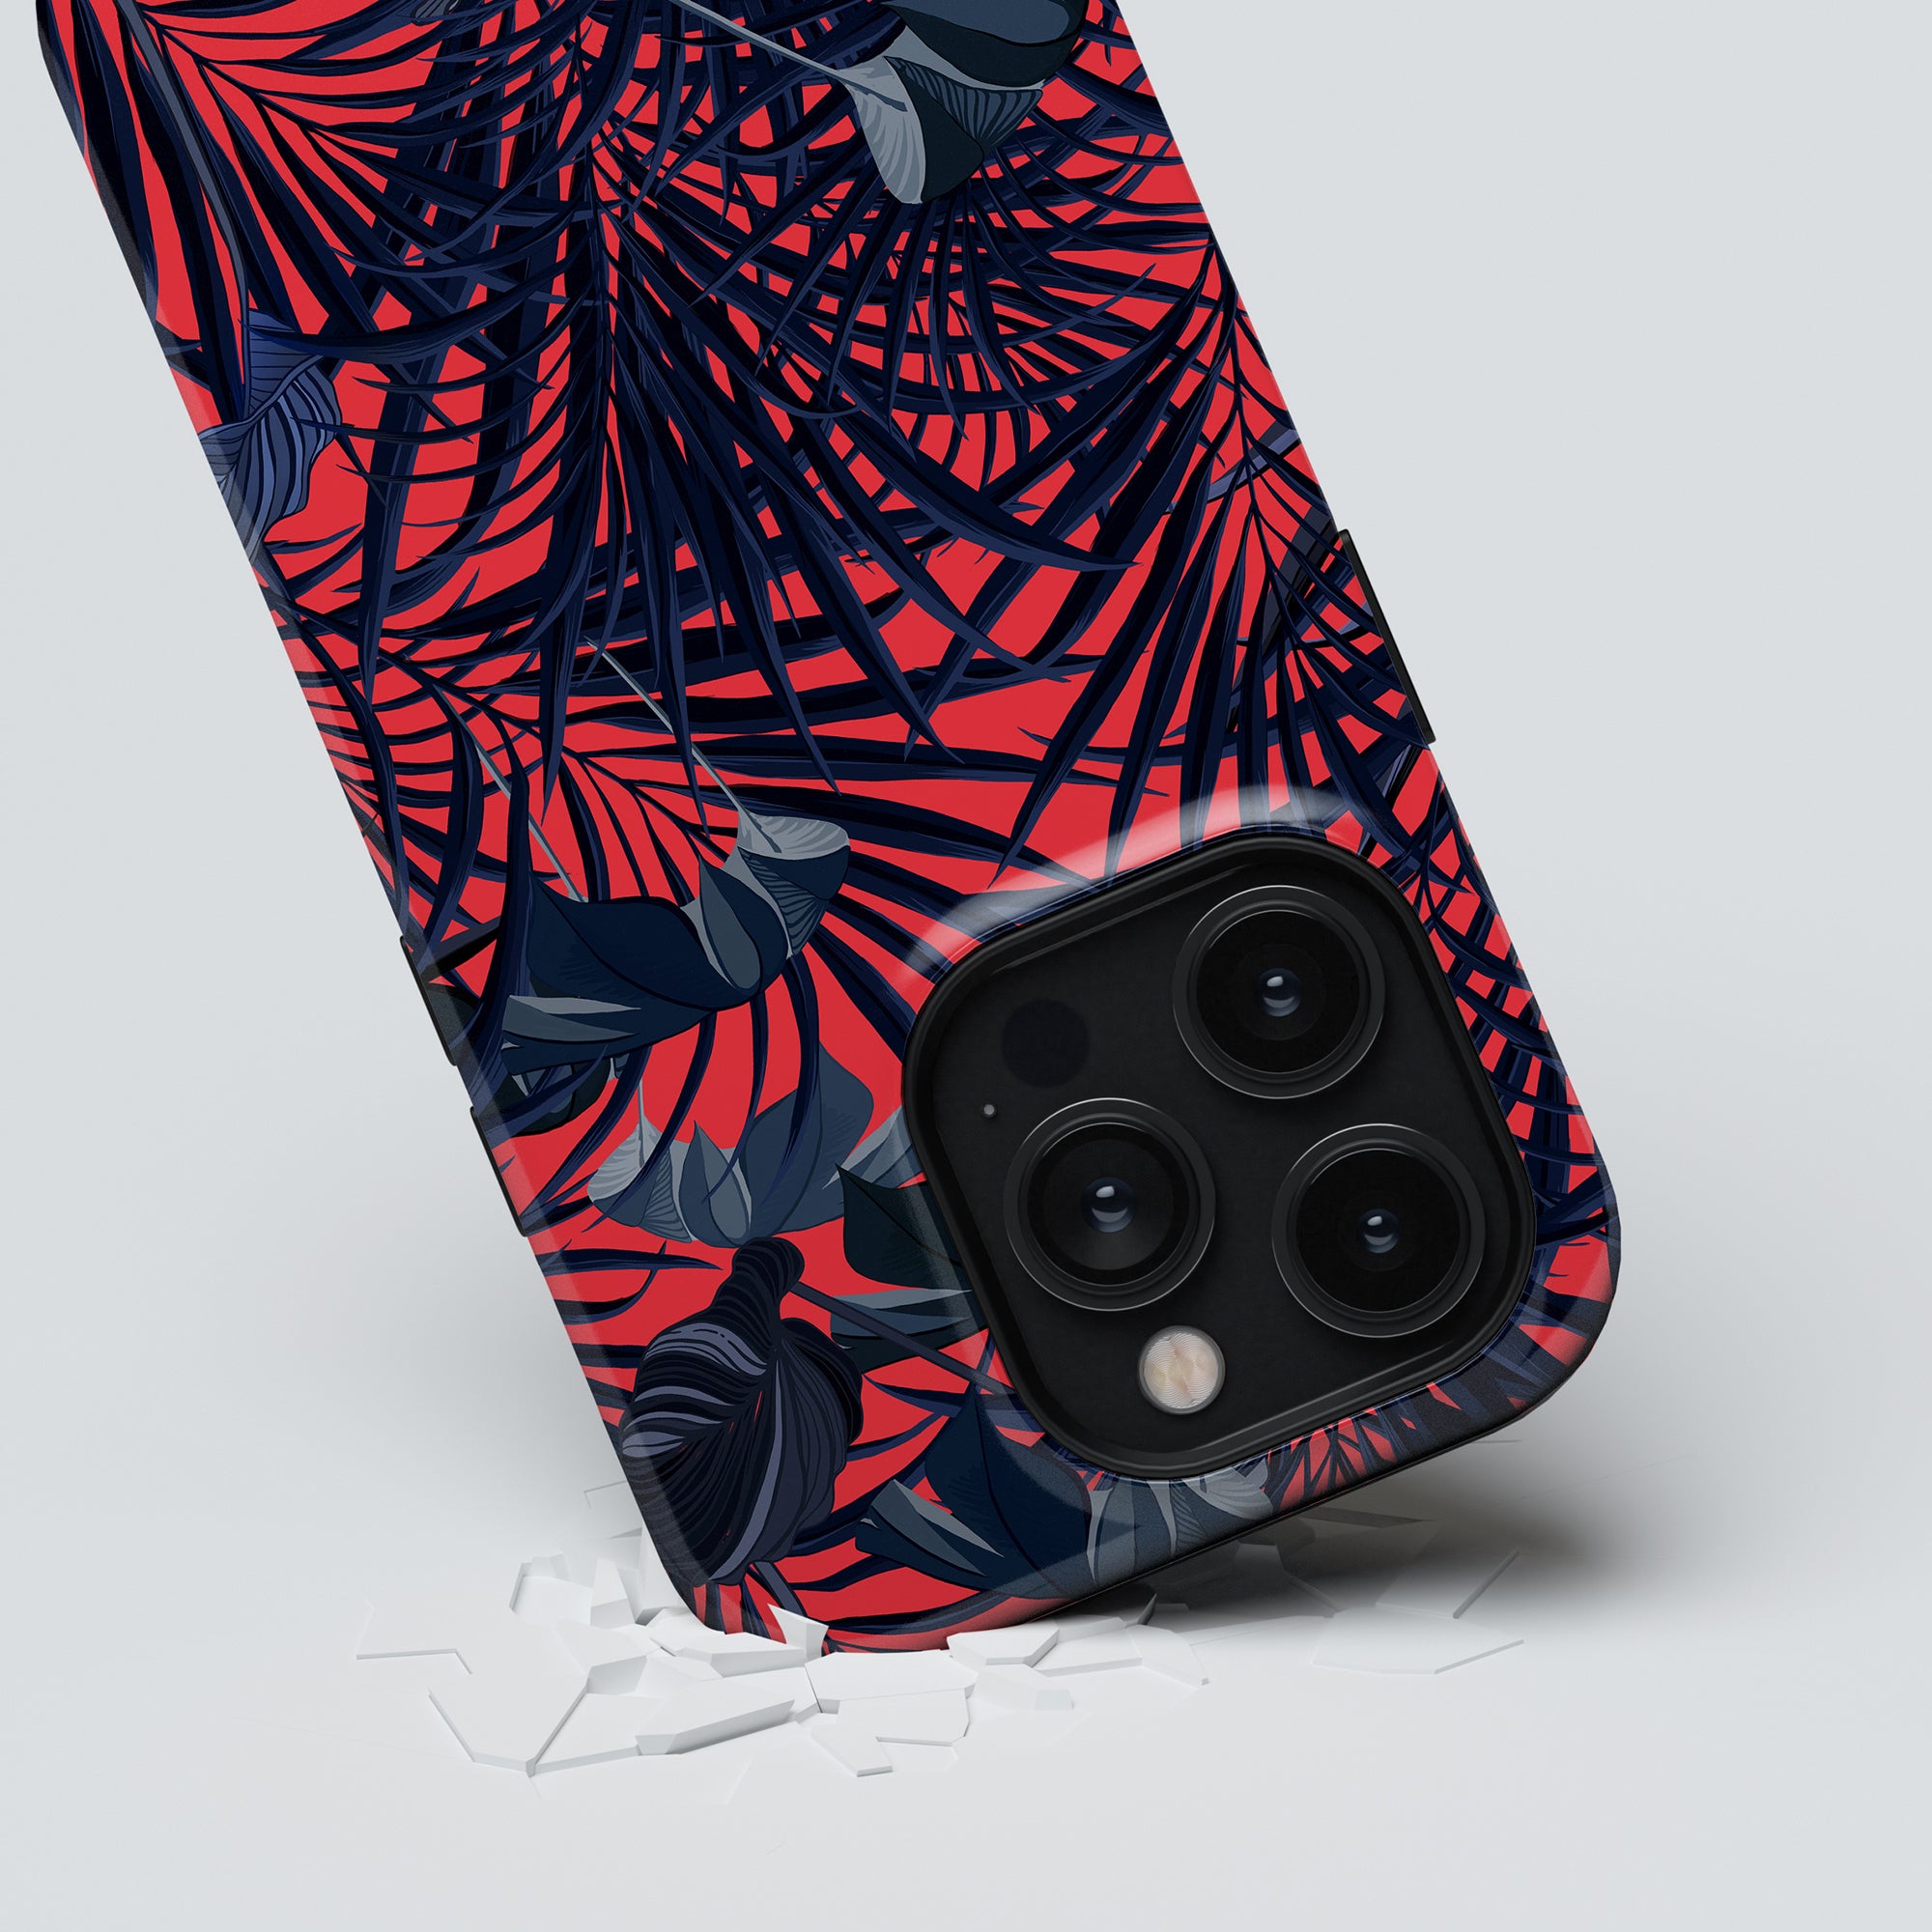 A smartphone with a Red Tropics - Tough Case featuring red and dark palm leaves is propped up on a white surface, with a visible crack underneath its lower right corner.